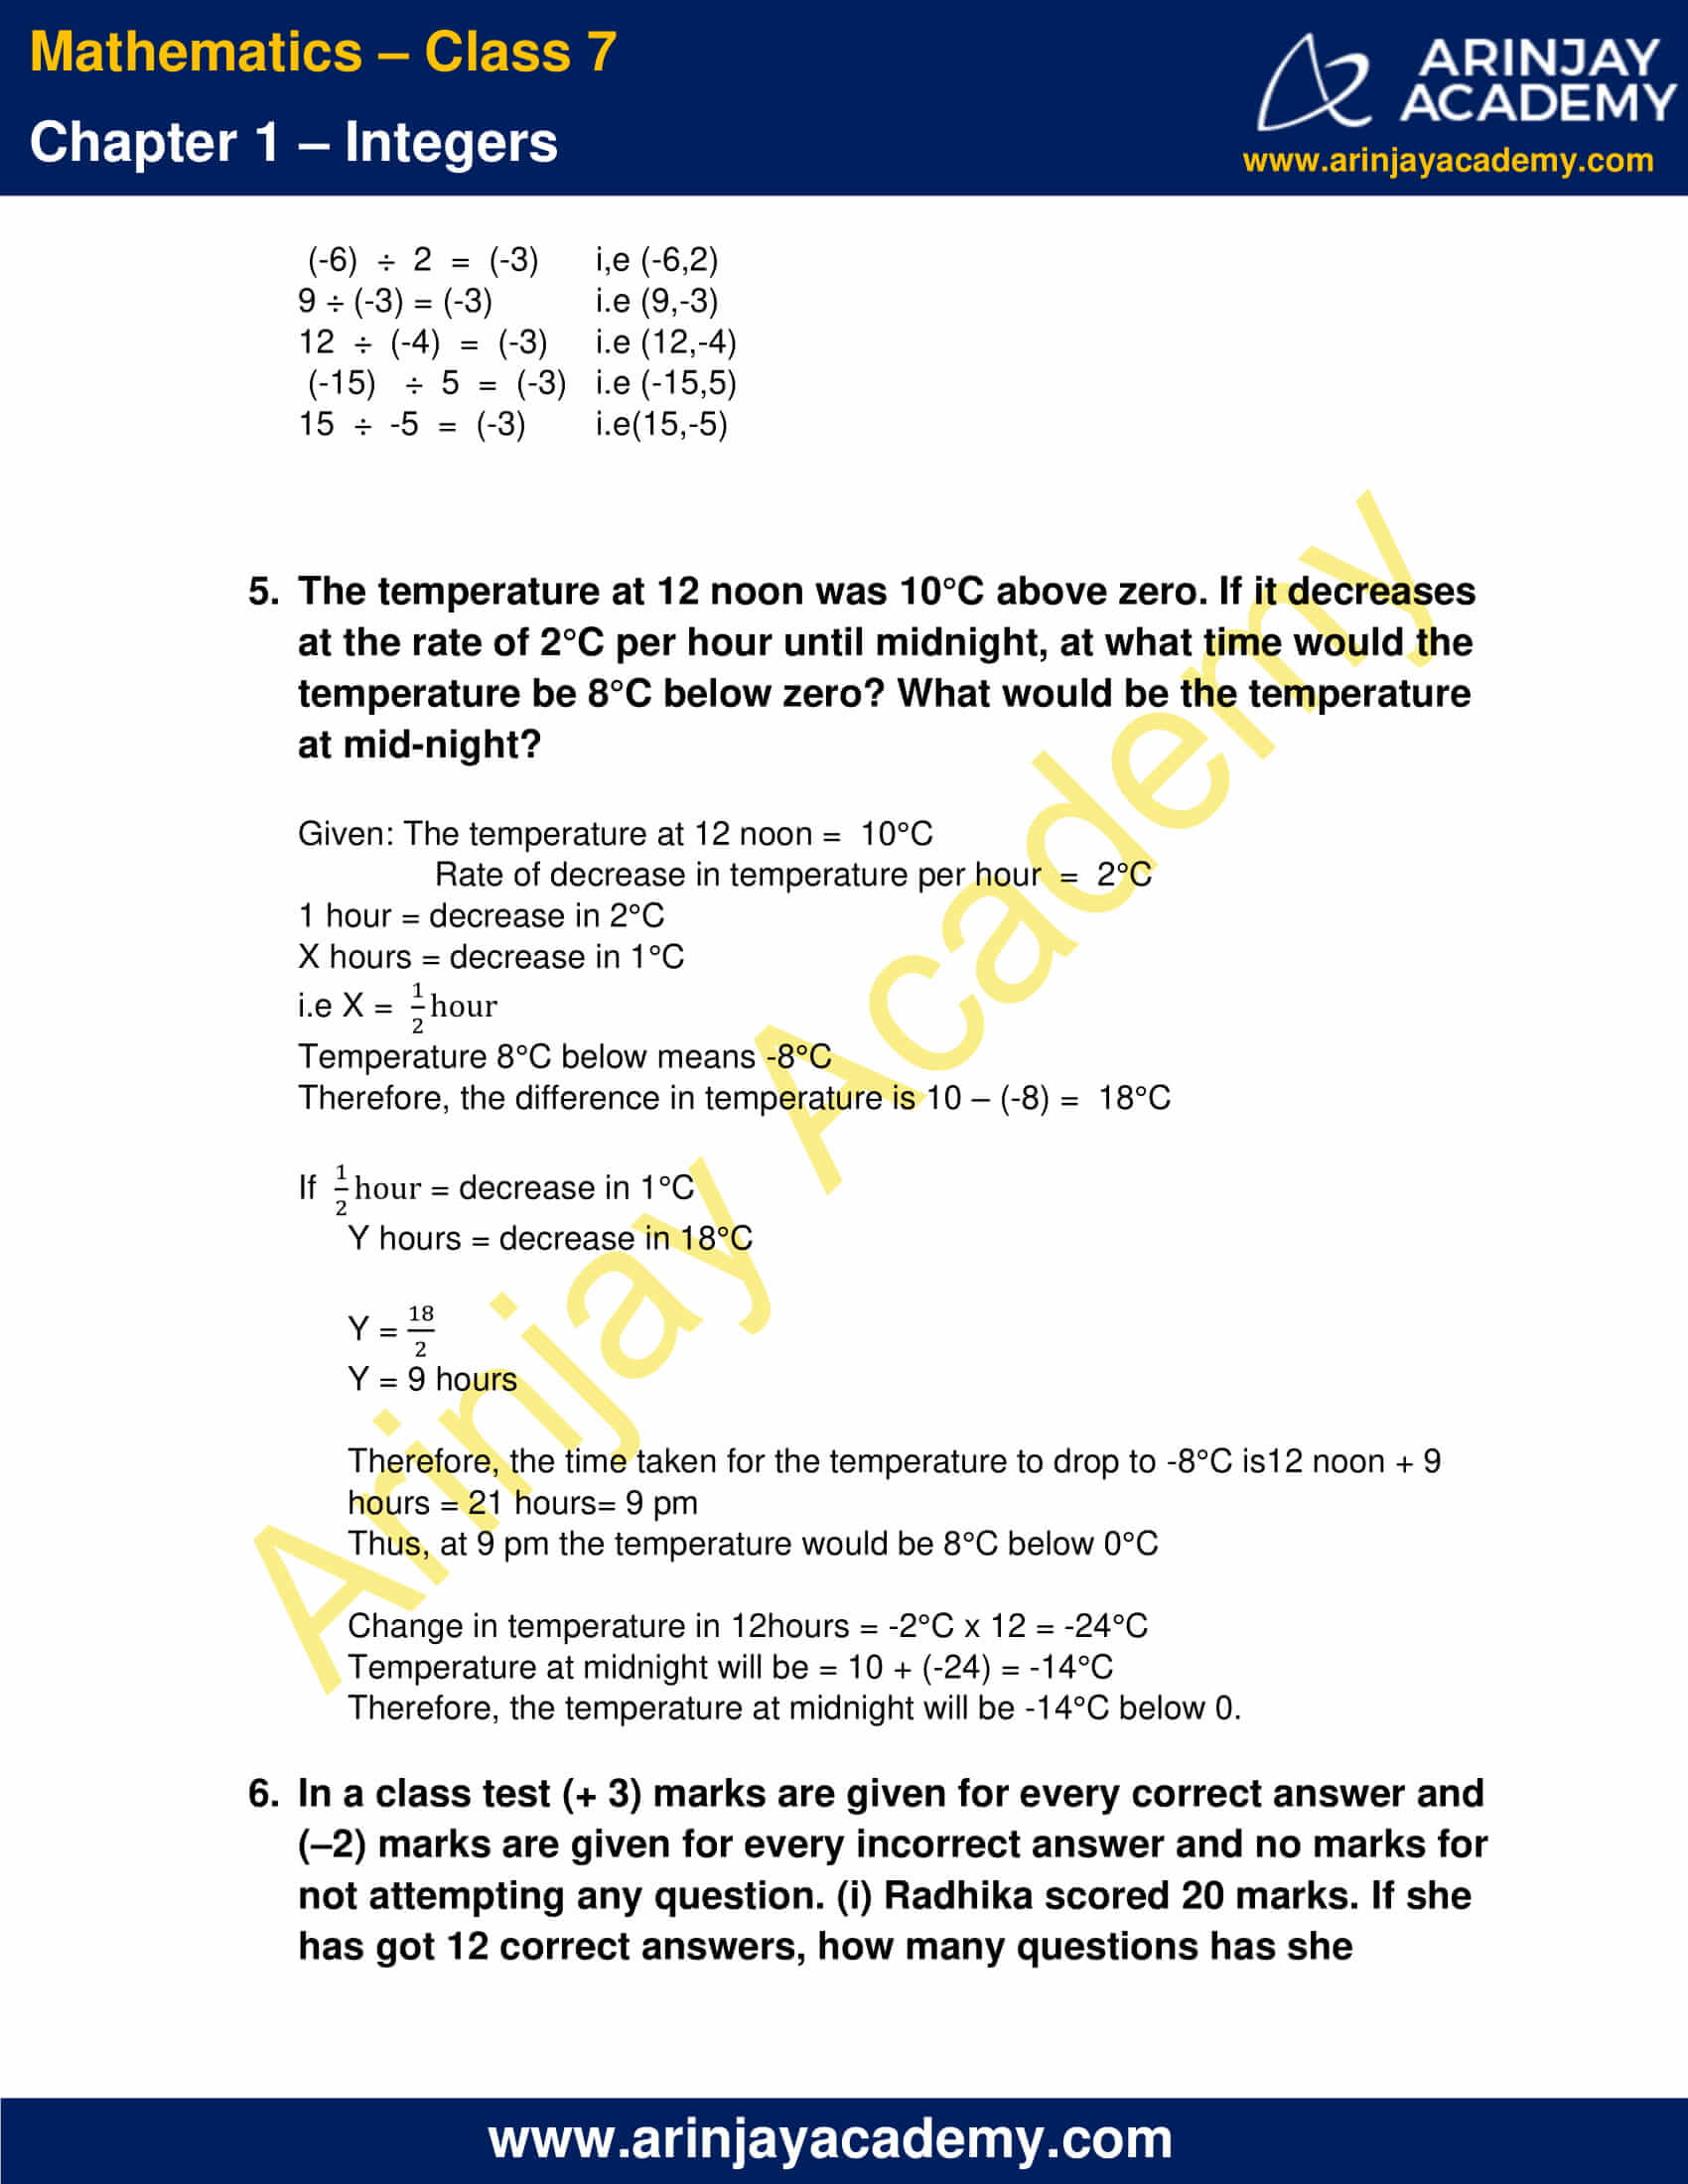 Class 7 Maths NCERT Solutions Chapter 1 Exercise 1.4 image 4